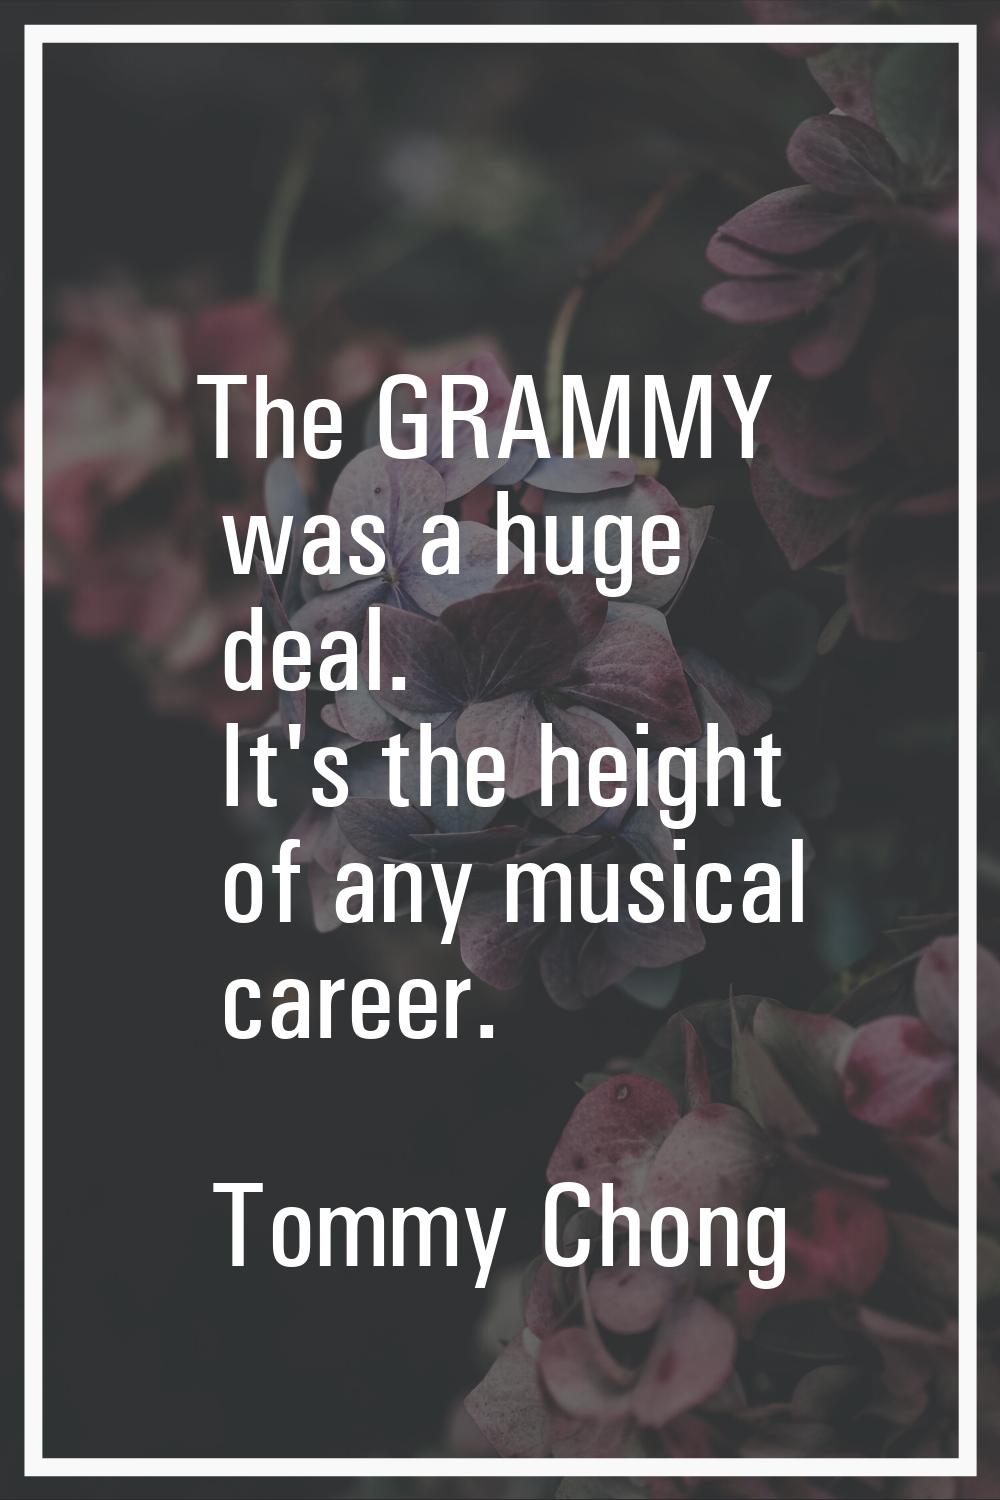 The GRAMMY was a huge deal. It's the height of any musical career.